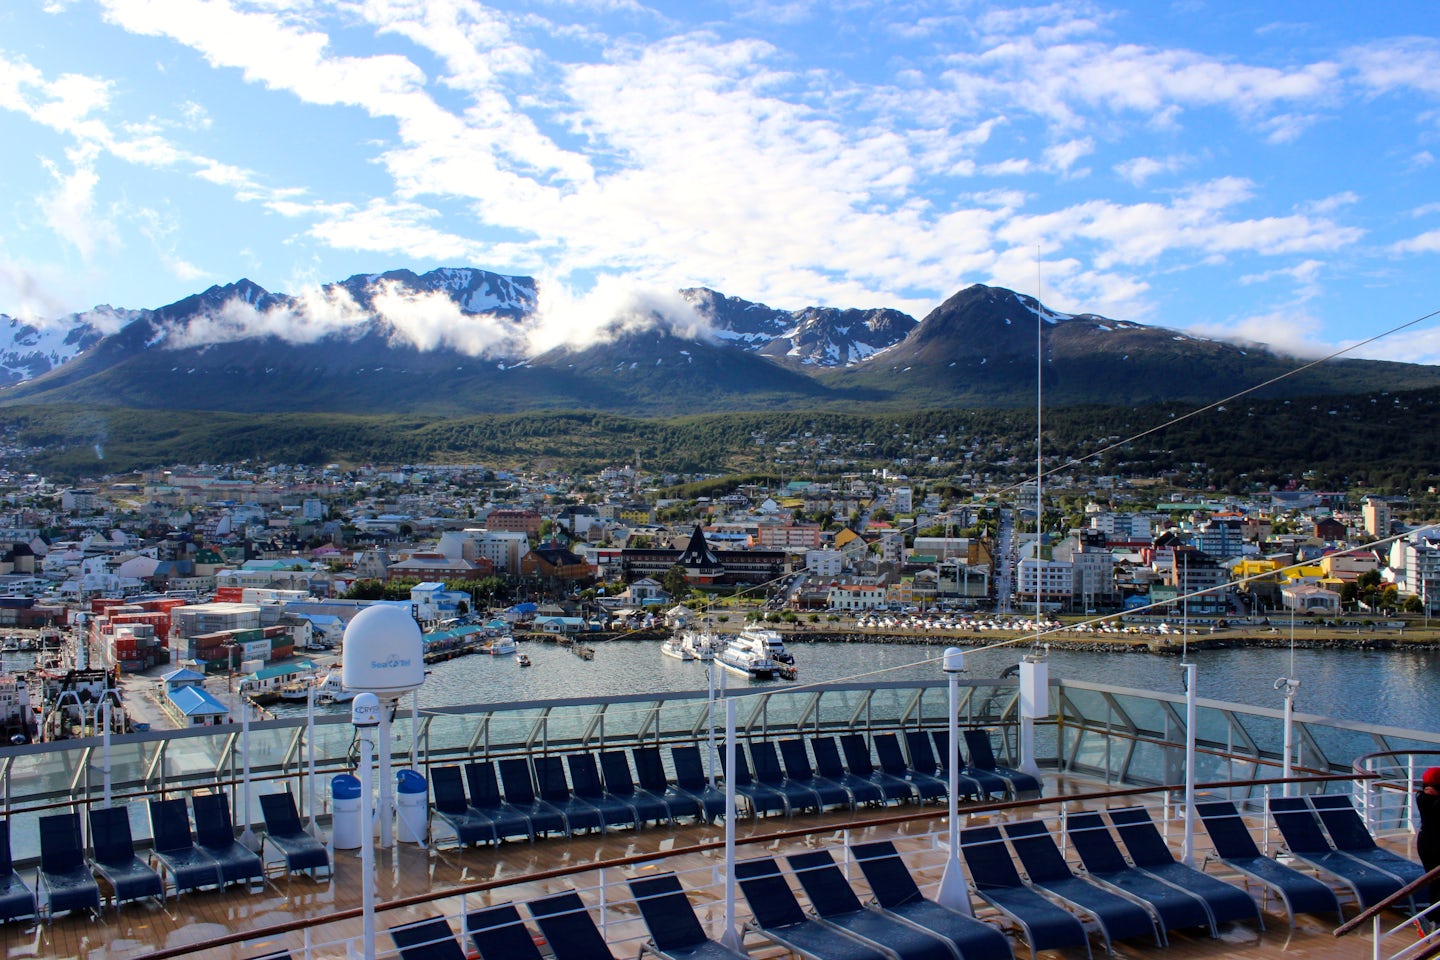 Our ship docked in the quaint town of Ushuaia, Argentina.